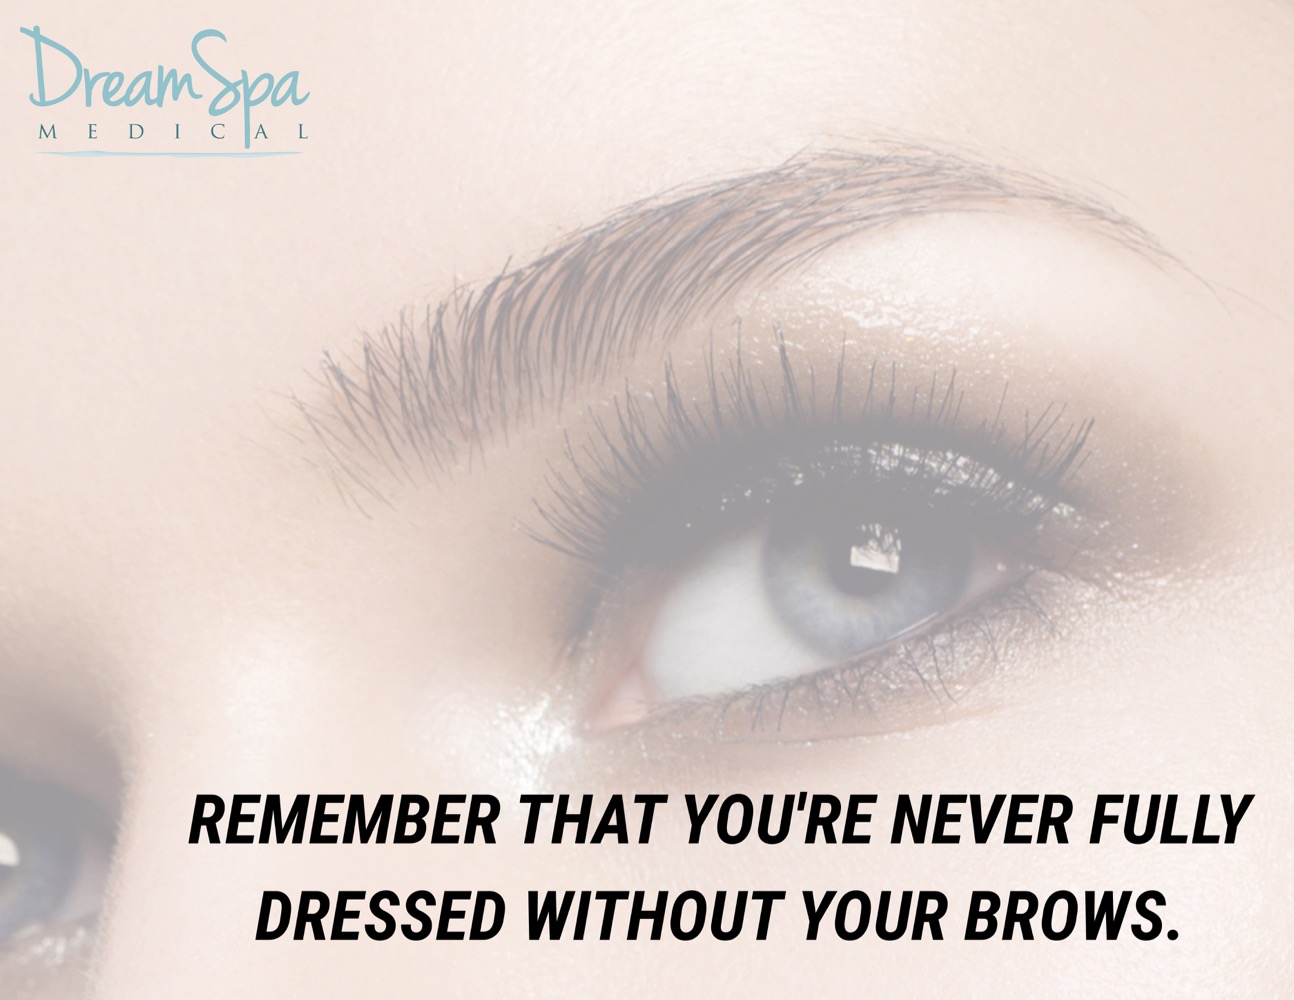 Dream Spa Medical Blog | You are Never Fully Dressed Without Brows